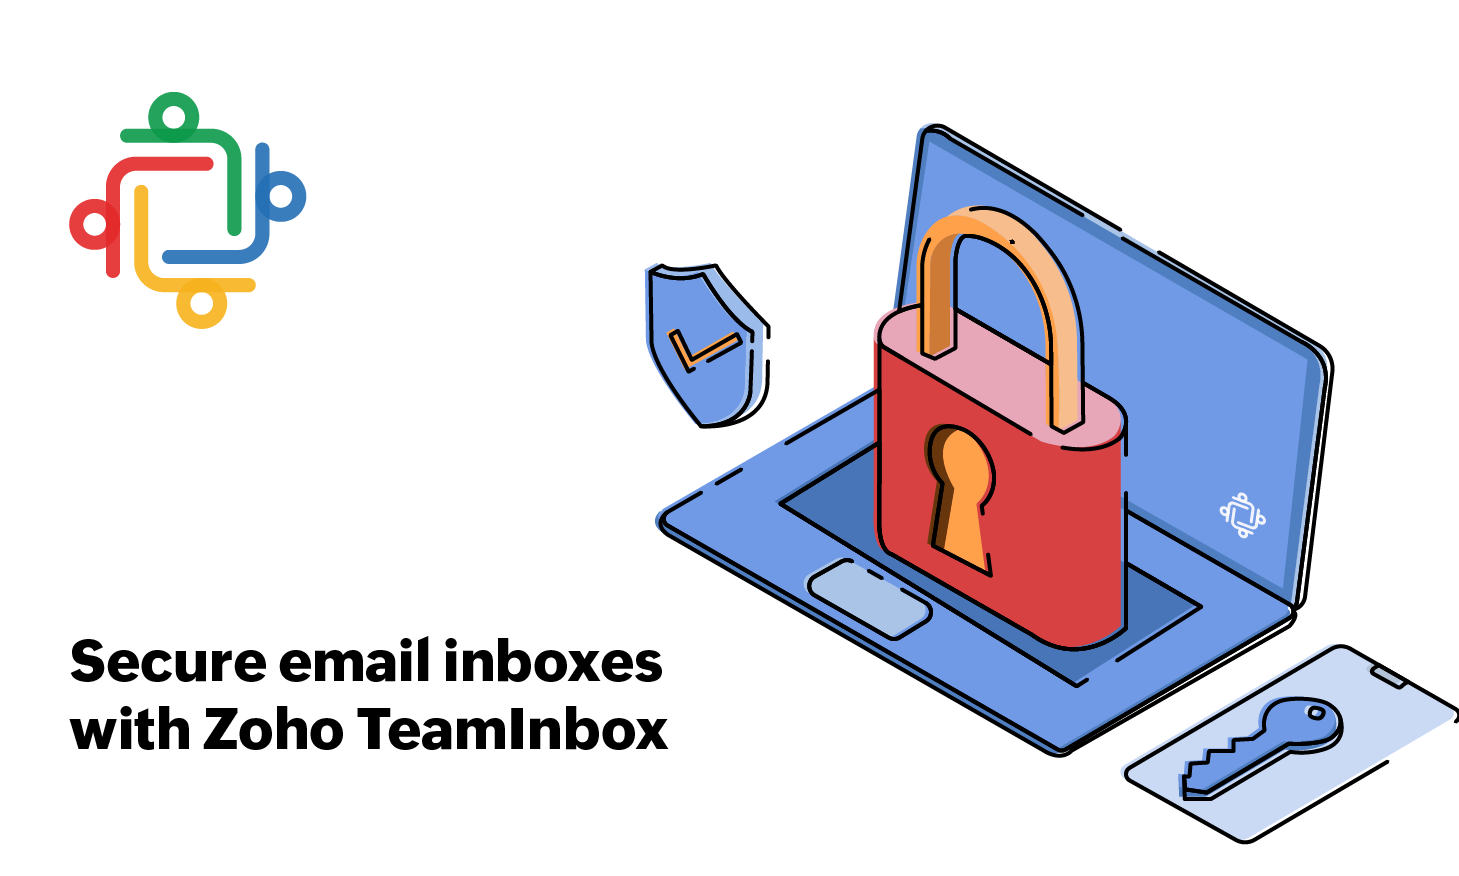 Secure email inboxes with Zoho TeamInbox